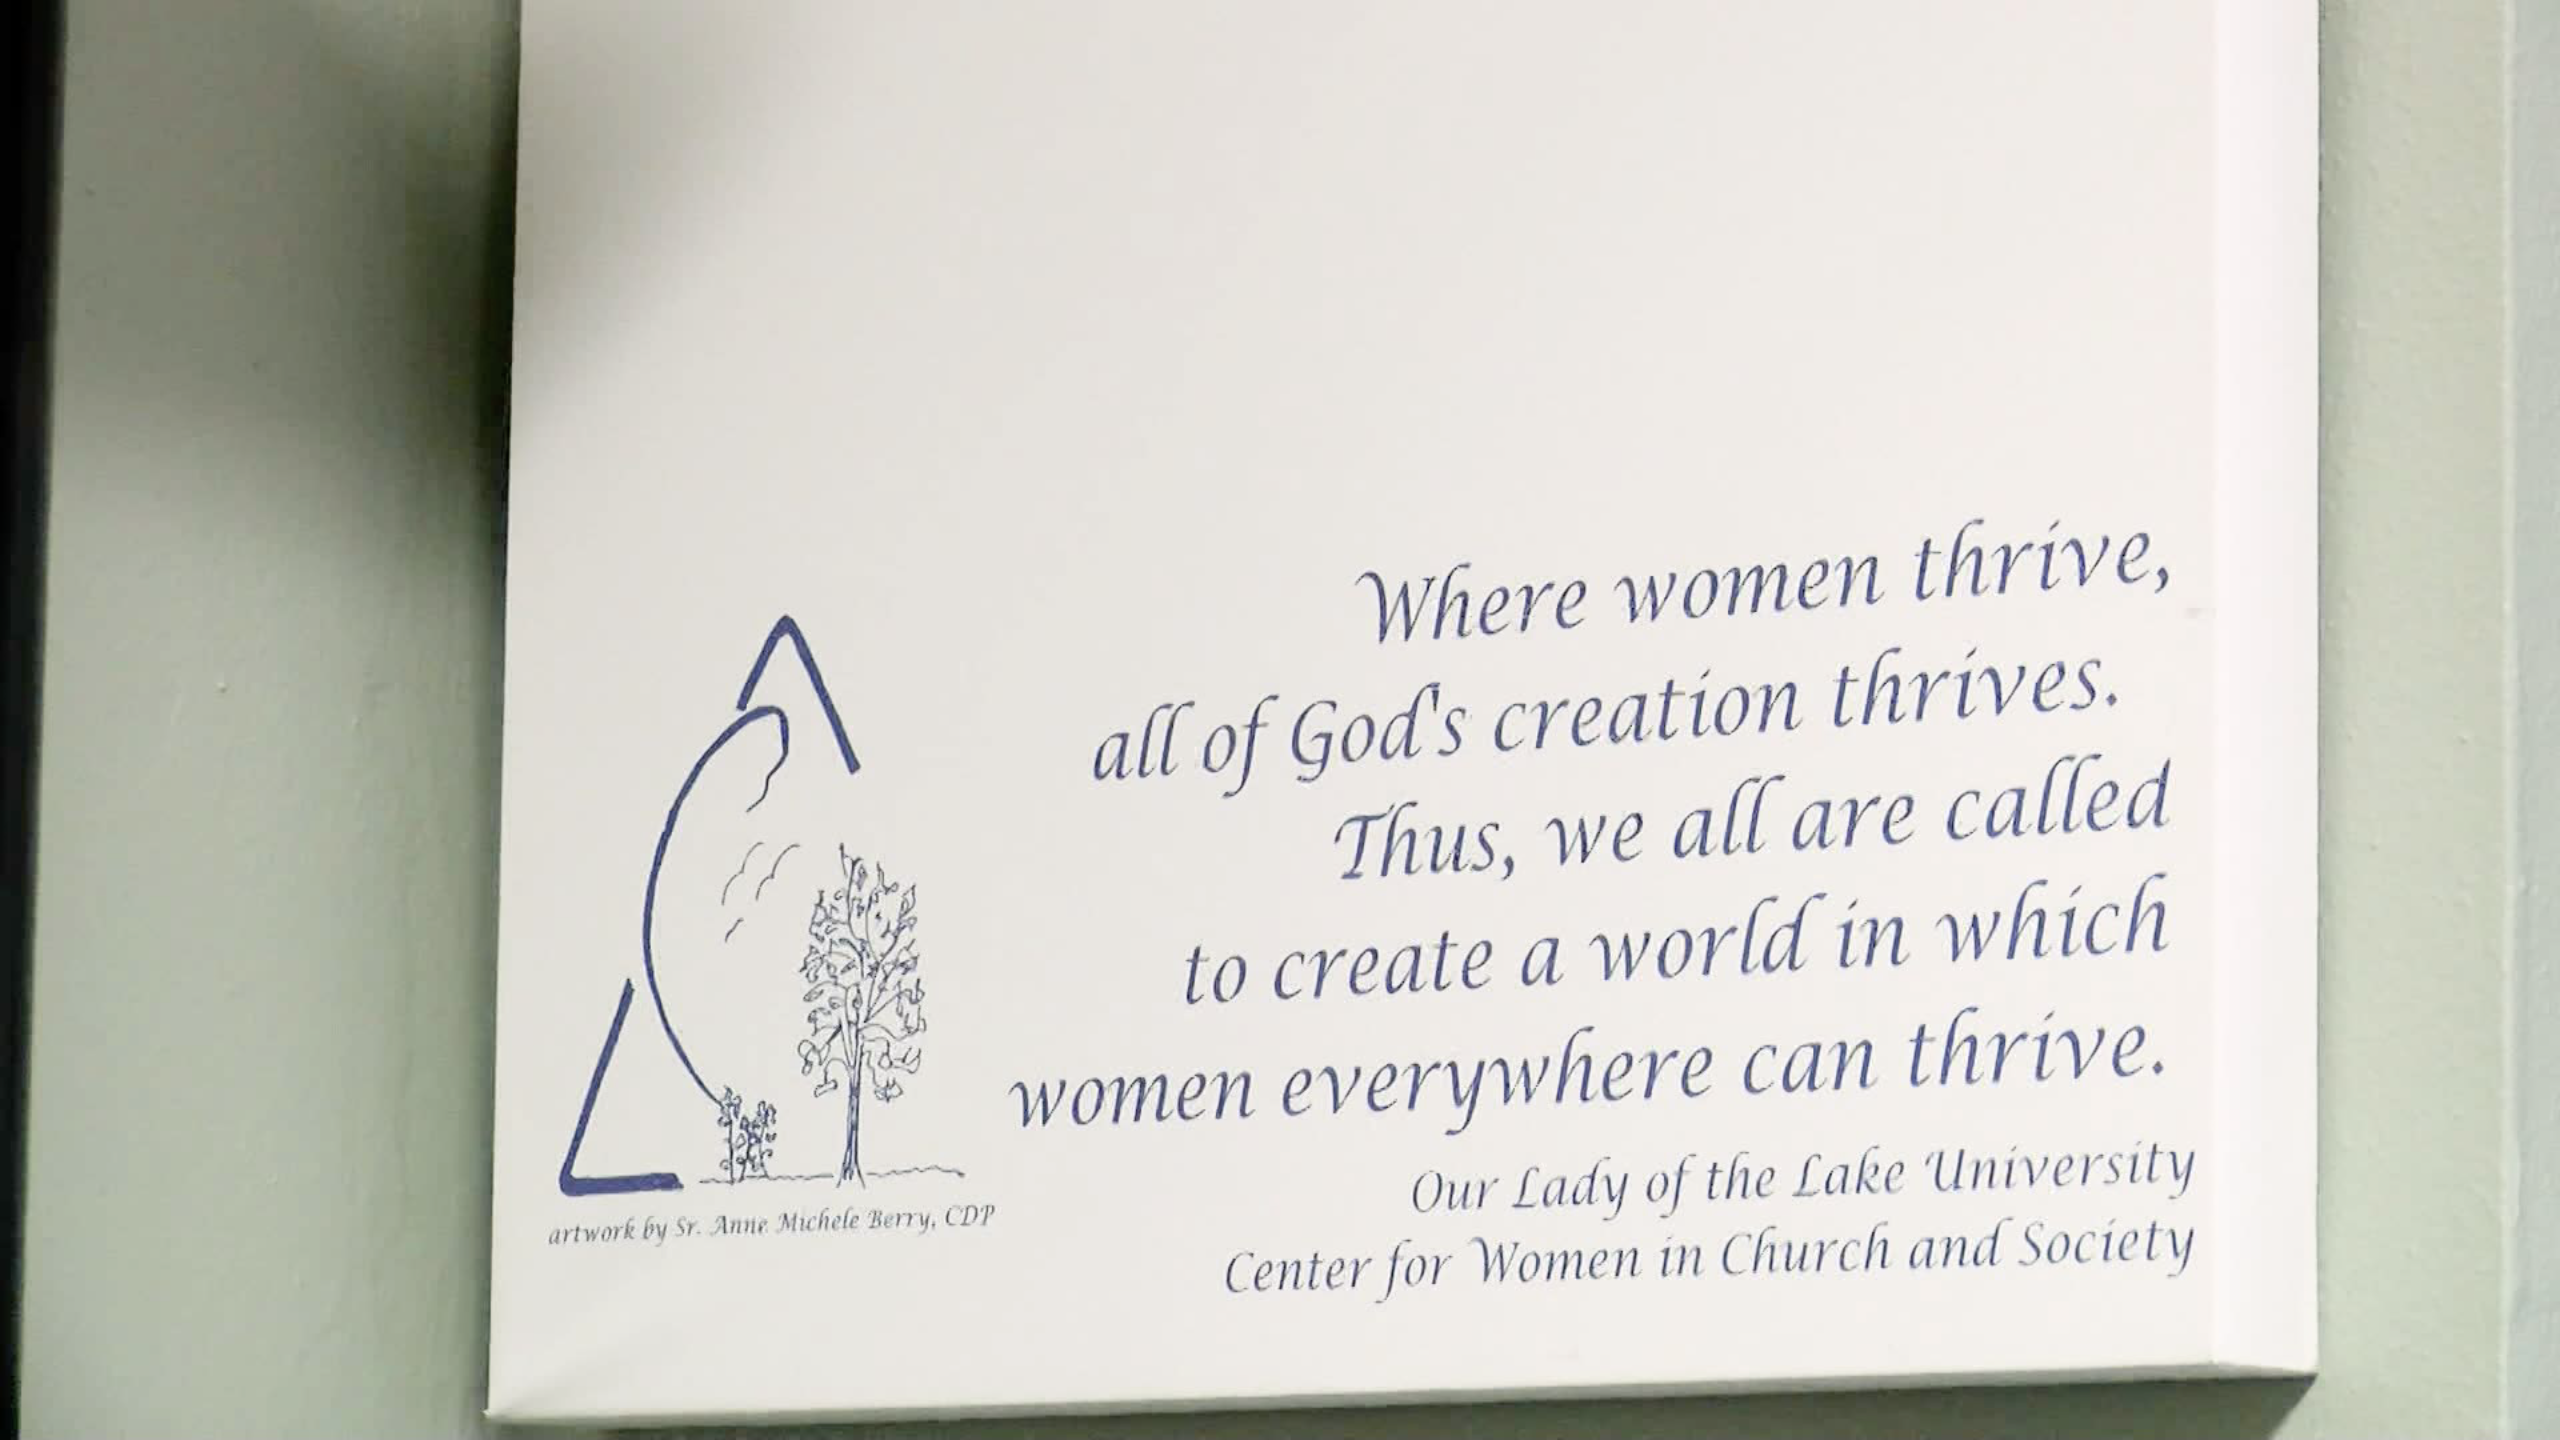 Center for Women in Church and Society